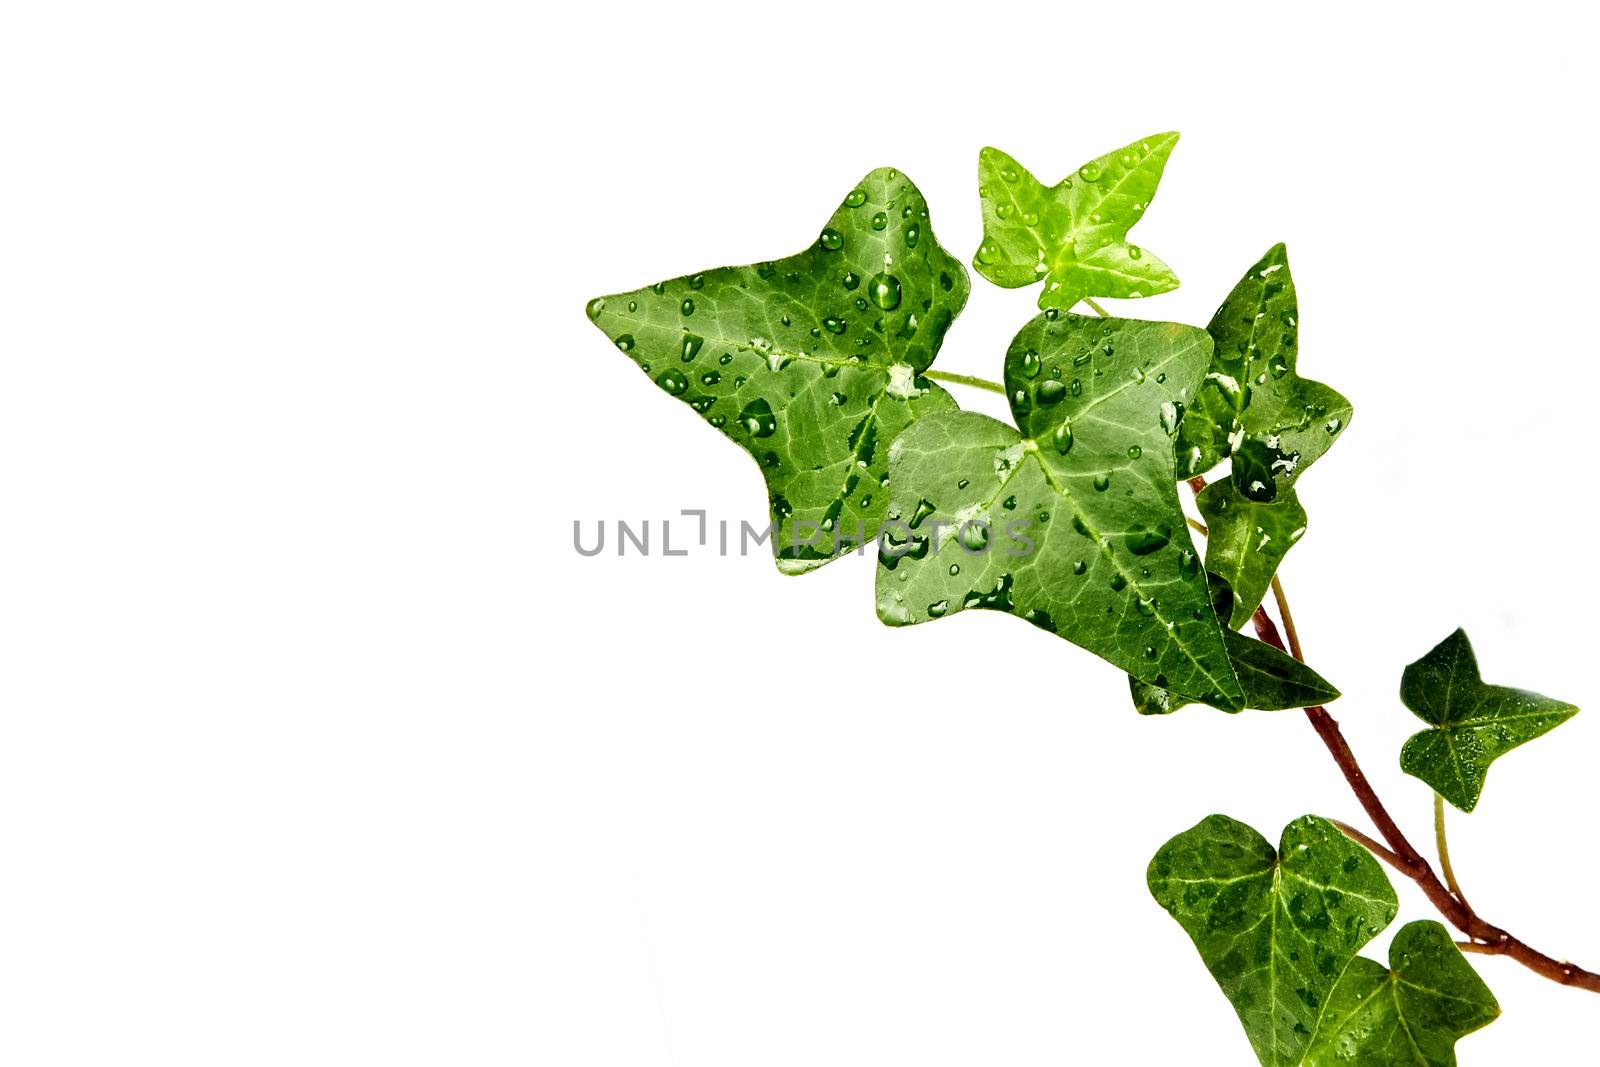 Herb hedera in dewdrops on a white background